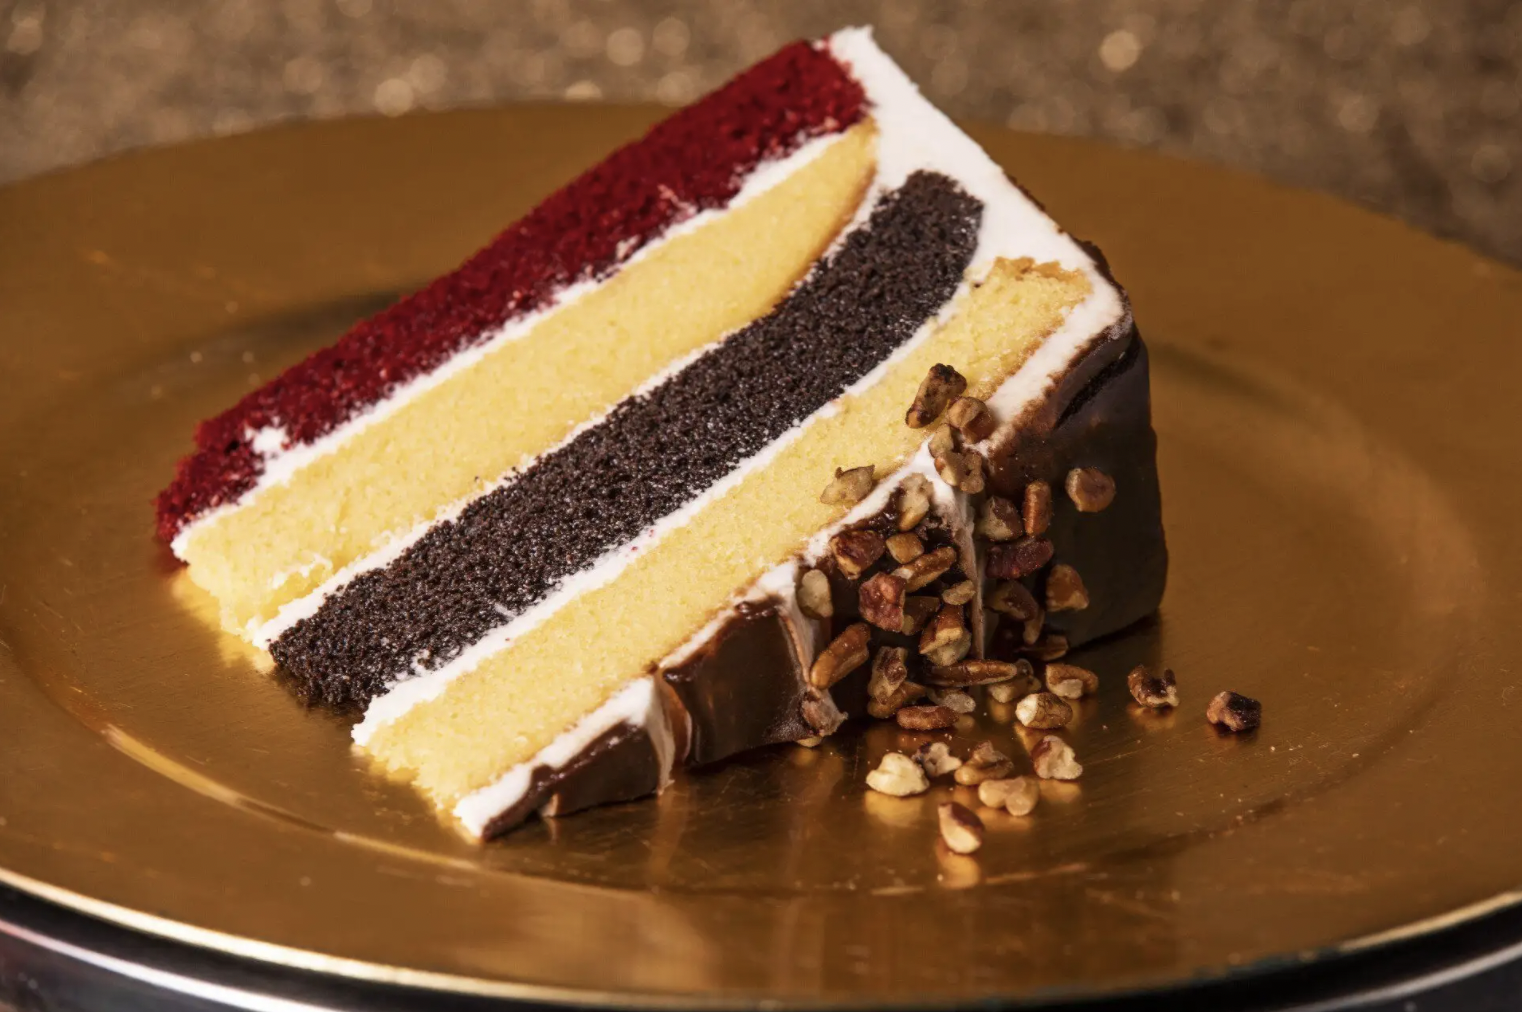 A slice of cake lays on its side on a plate.